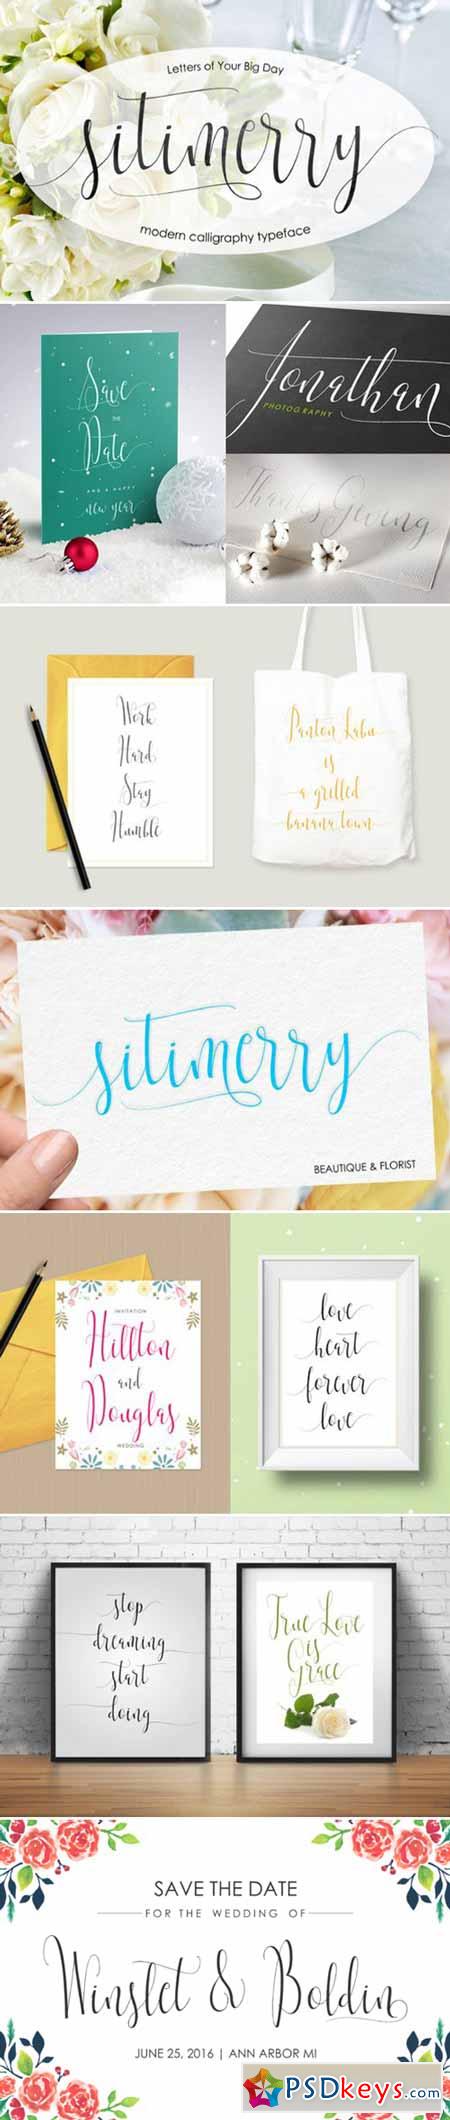 Sitimerry Script for Your Big Day 442801